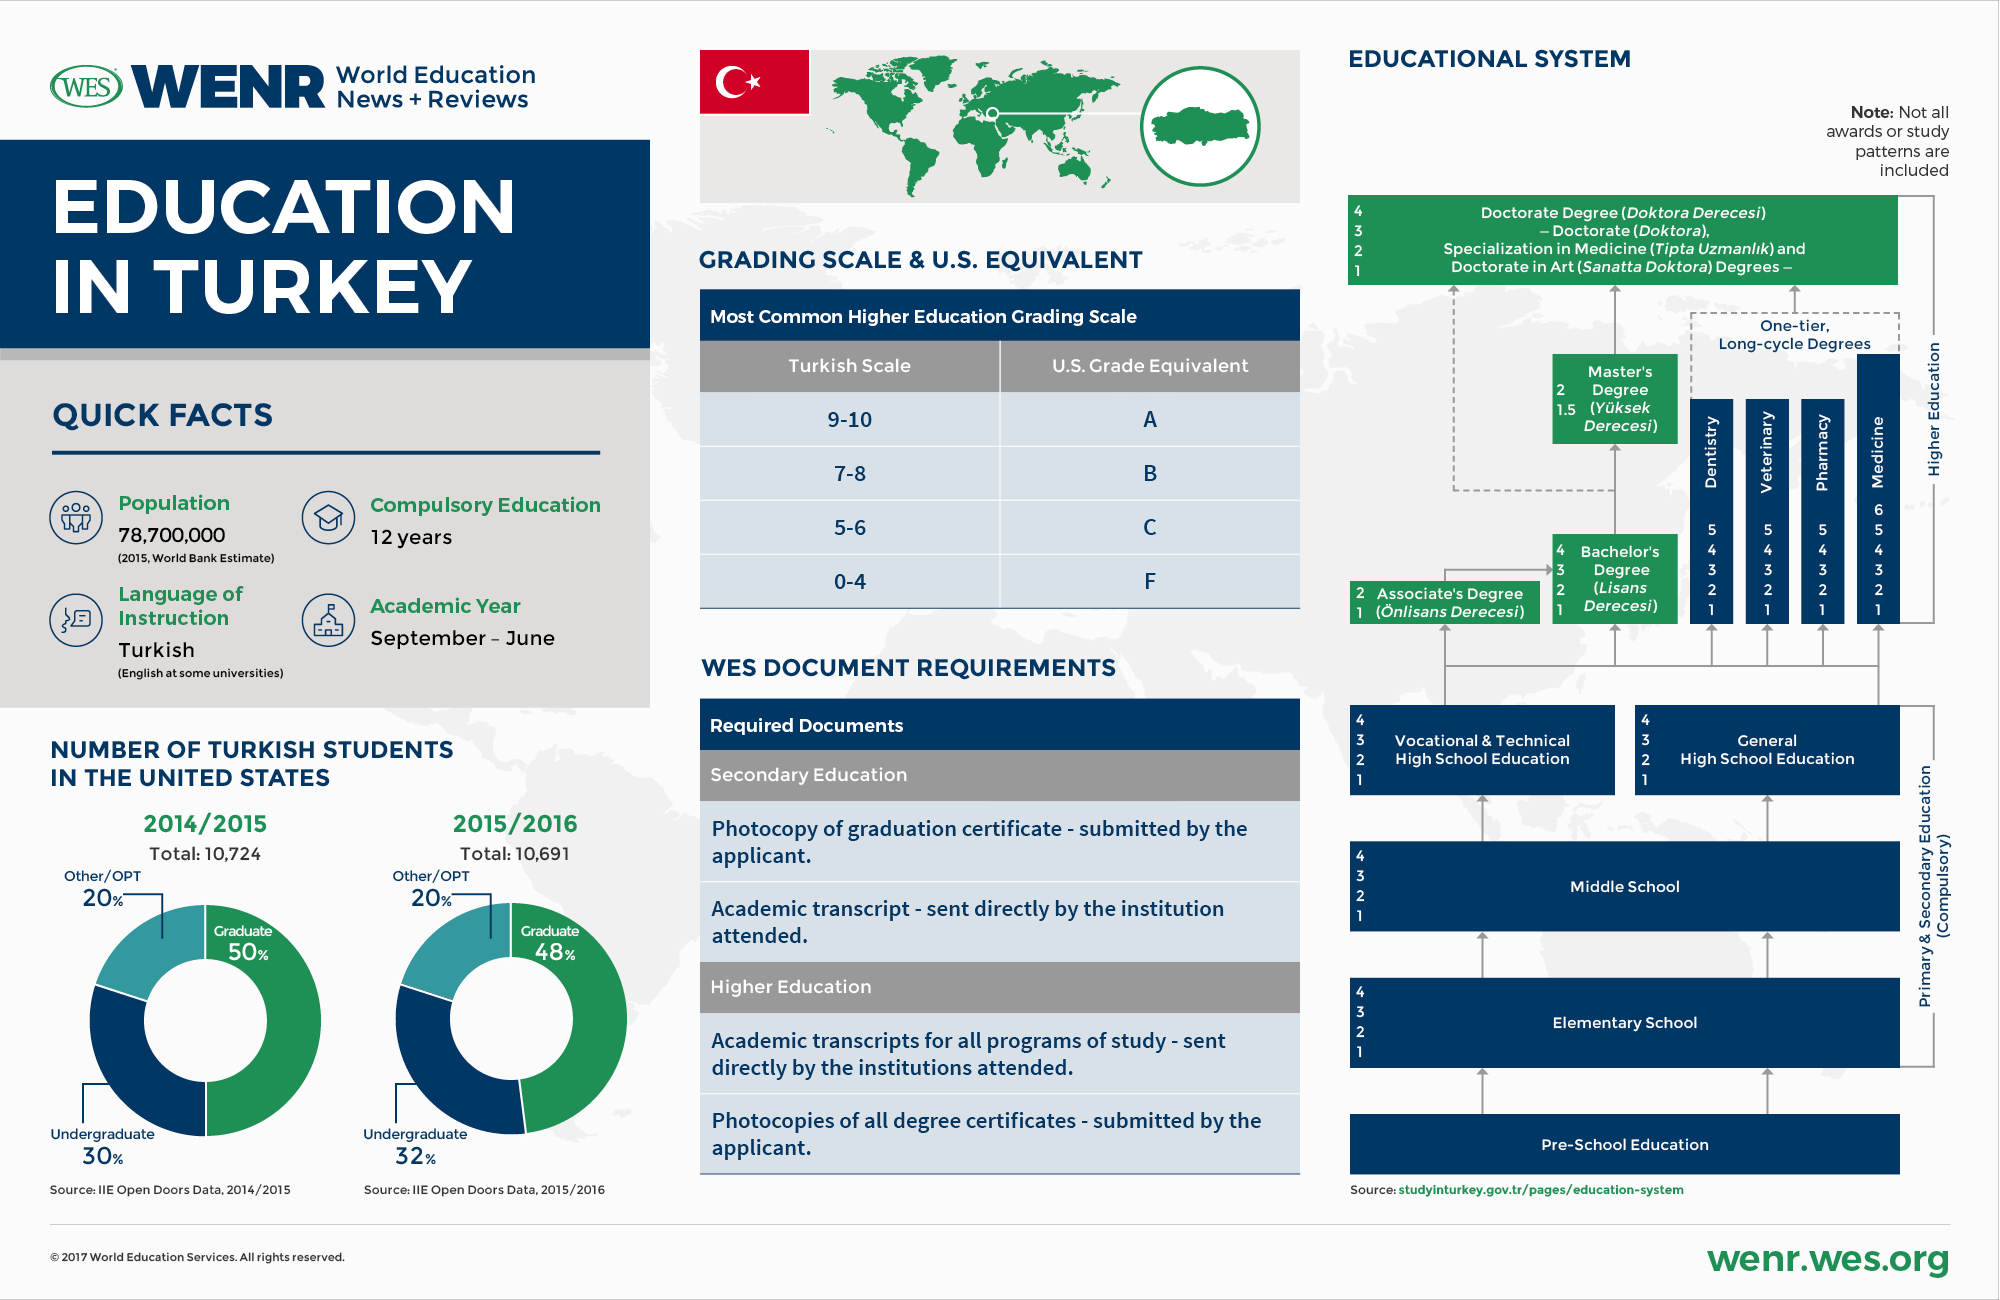 An infographic with fast facts about Türkiye's educational system and international student mobility landscape. 